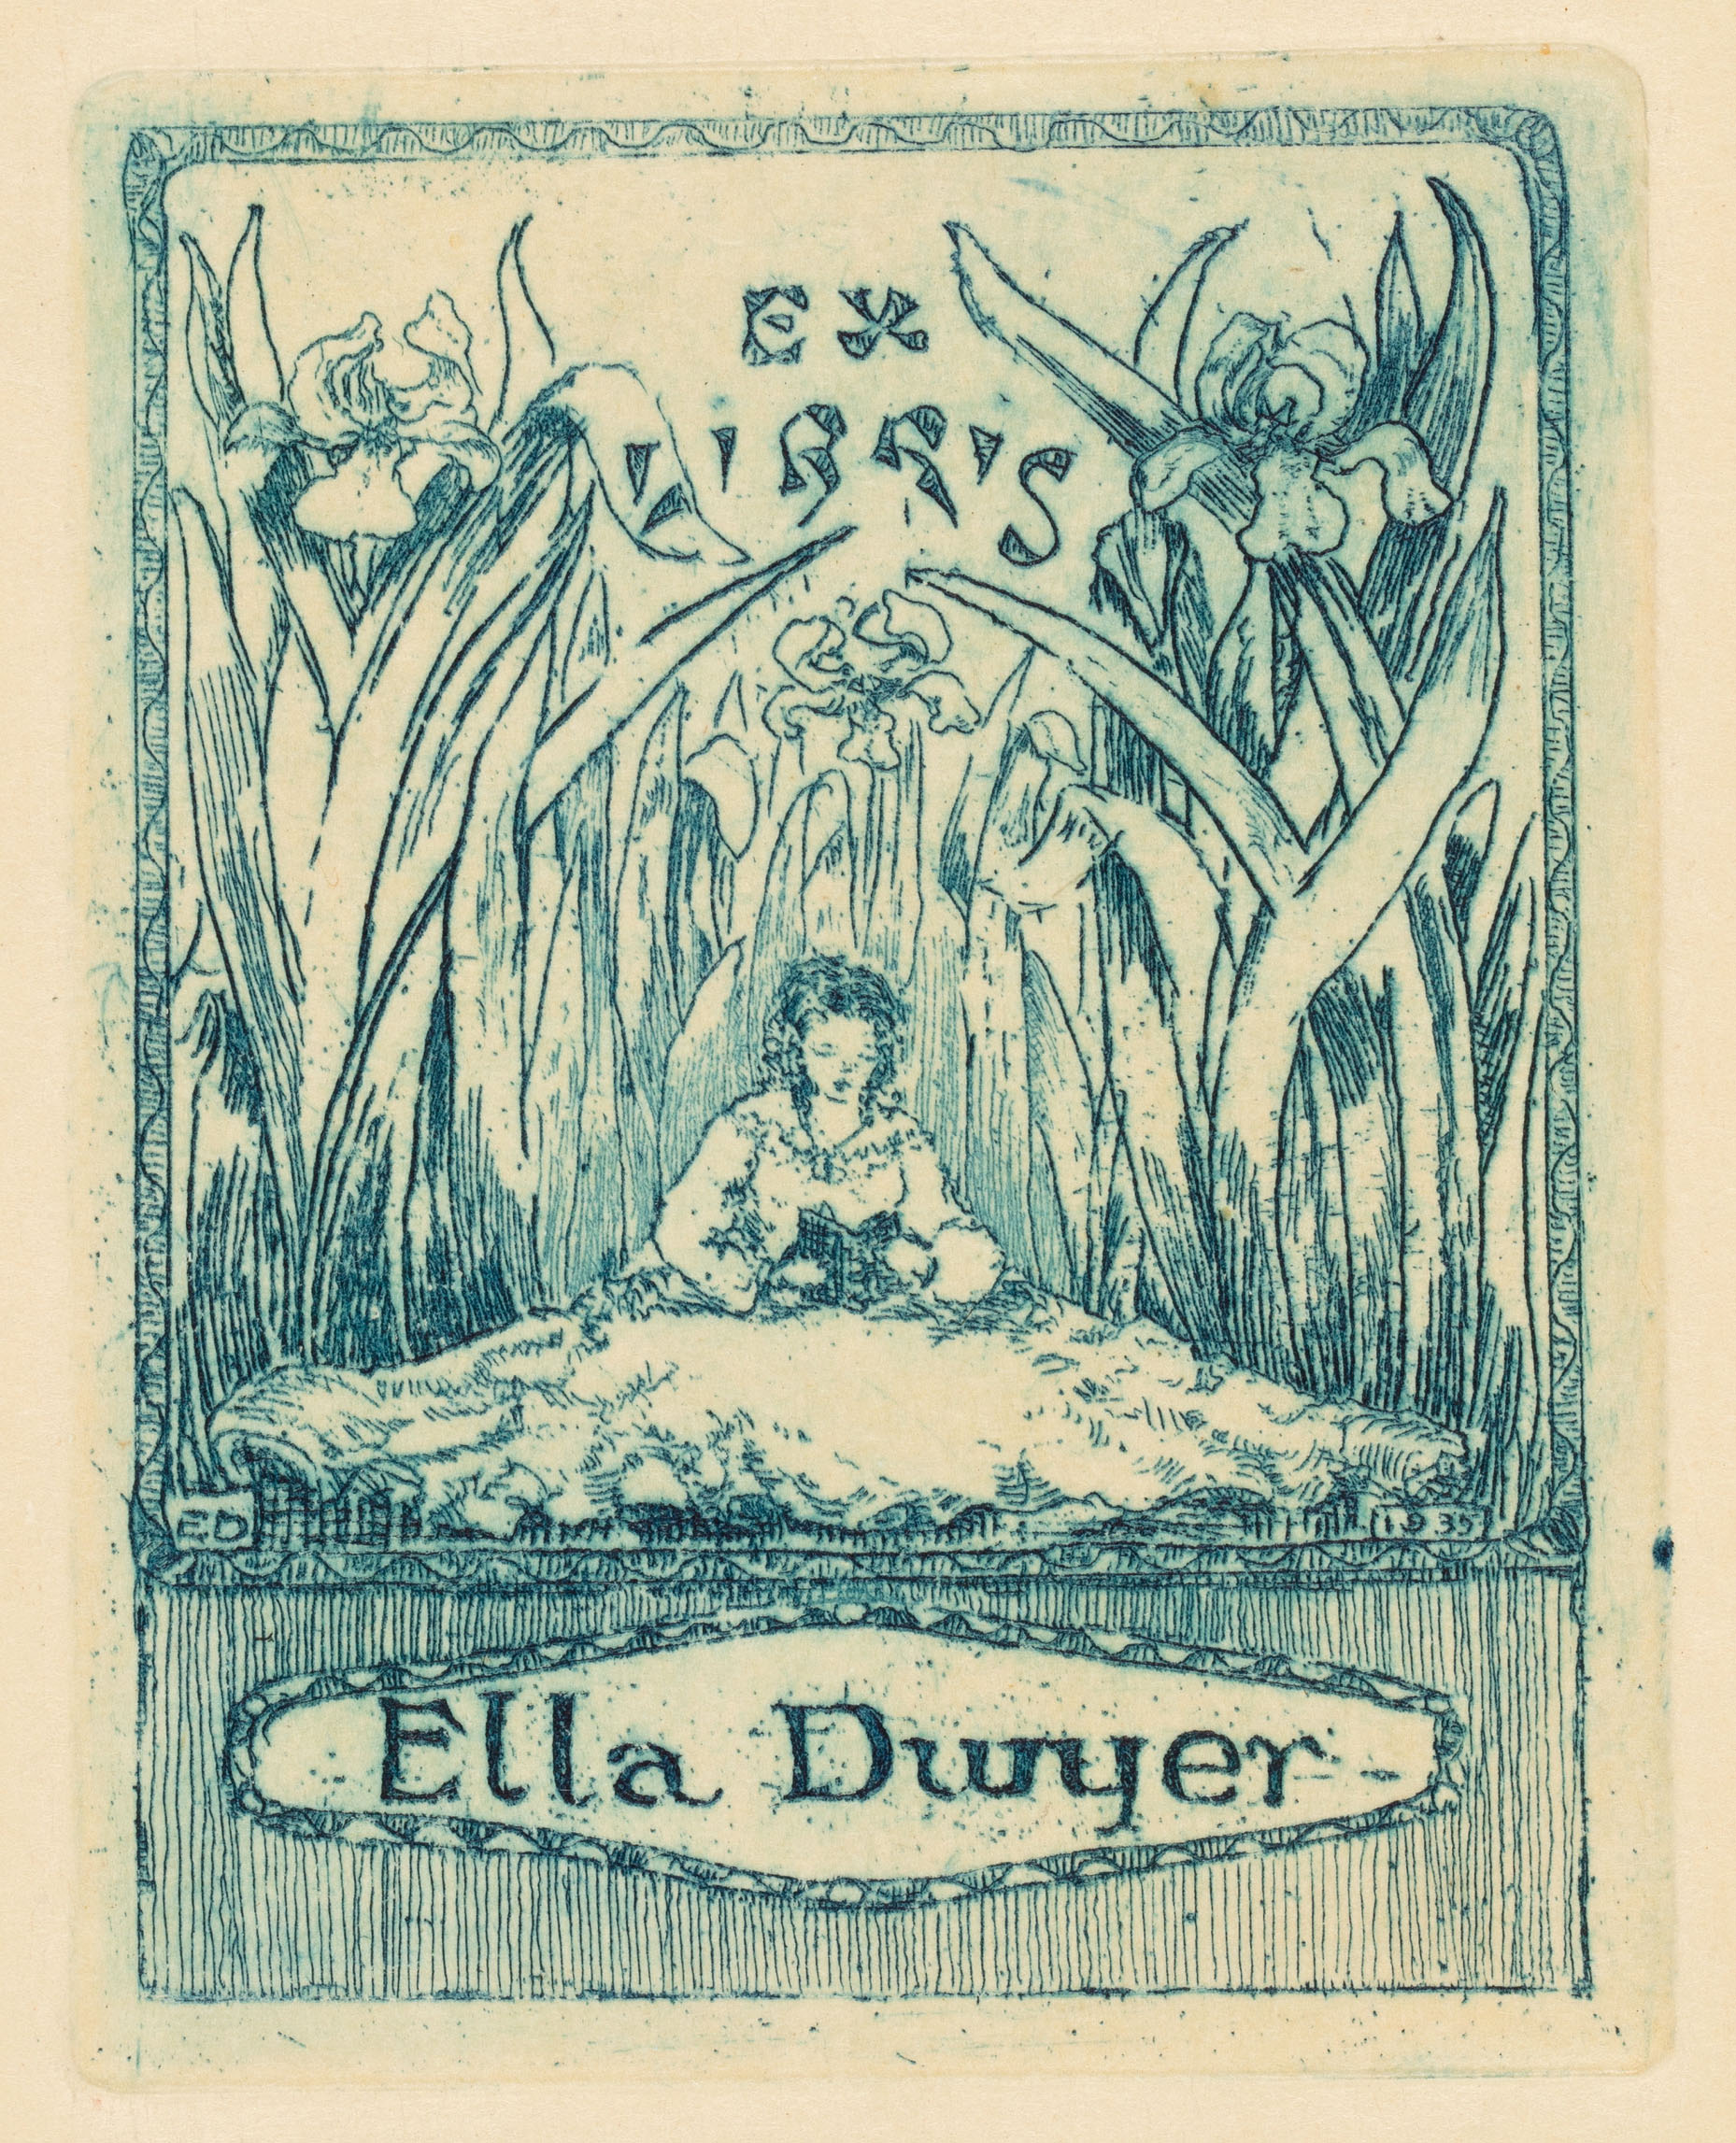 Blue ink printed image of a woman sitting among trees